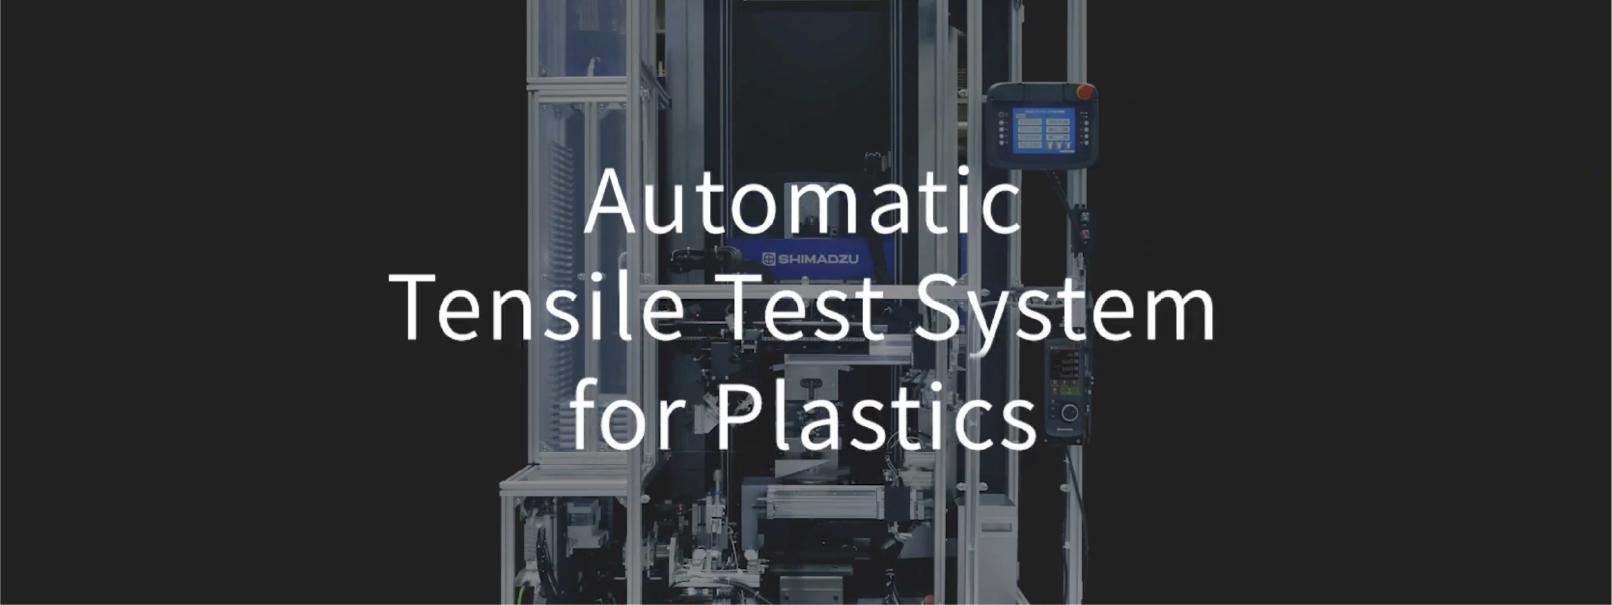 Automatic Tensile Test System for Plastics